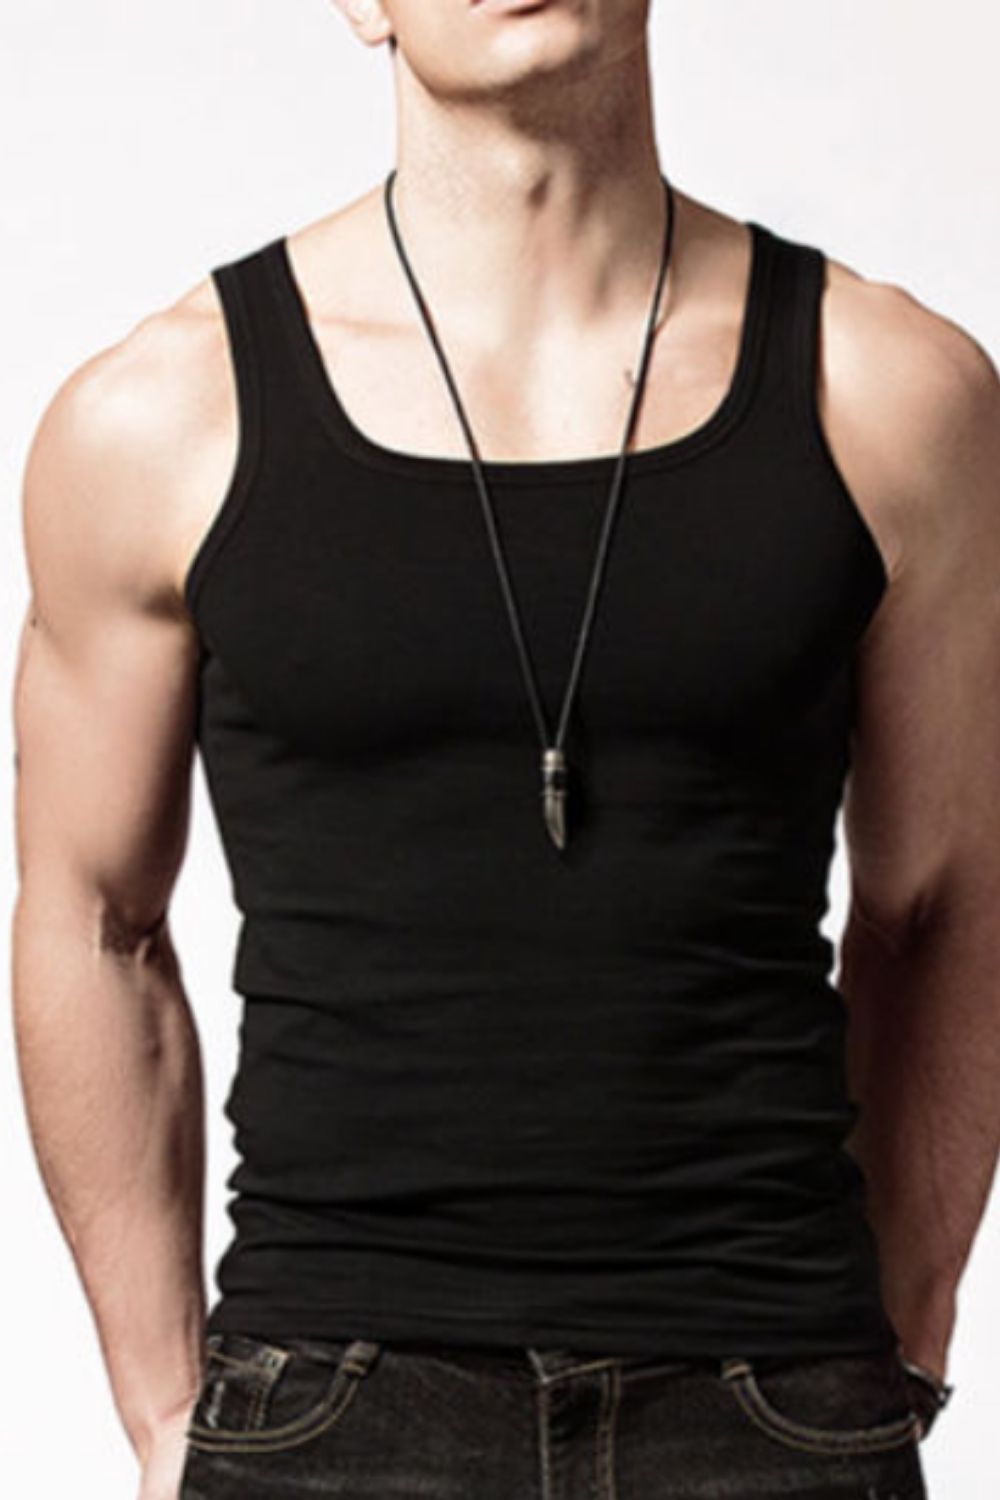 Men's Workout Shirts & Tops in Black